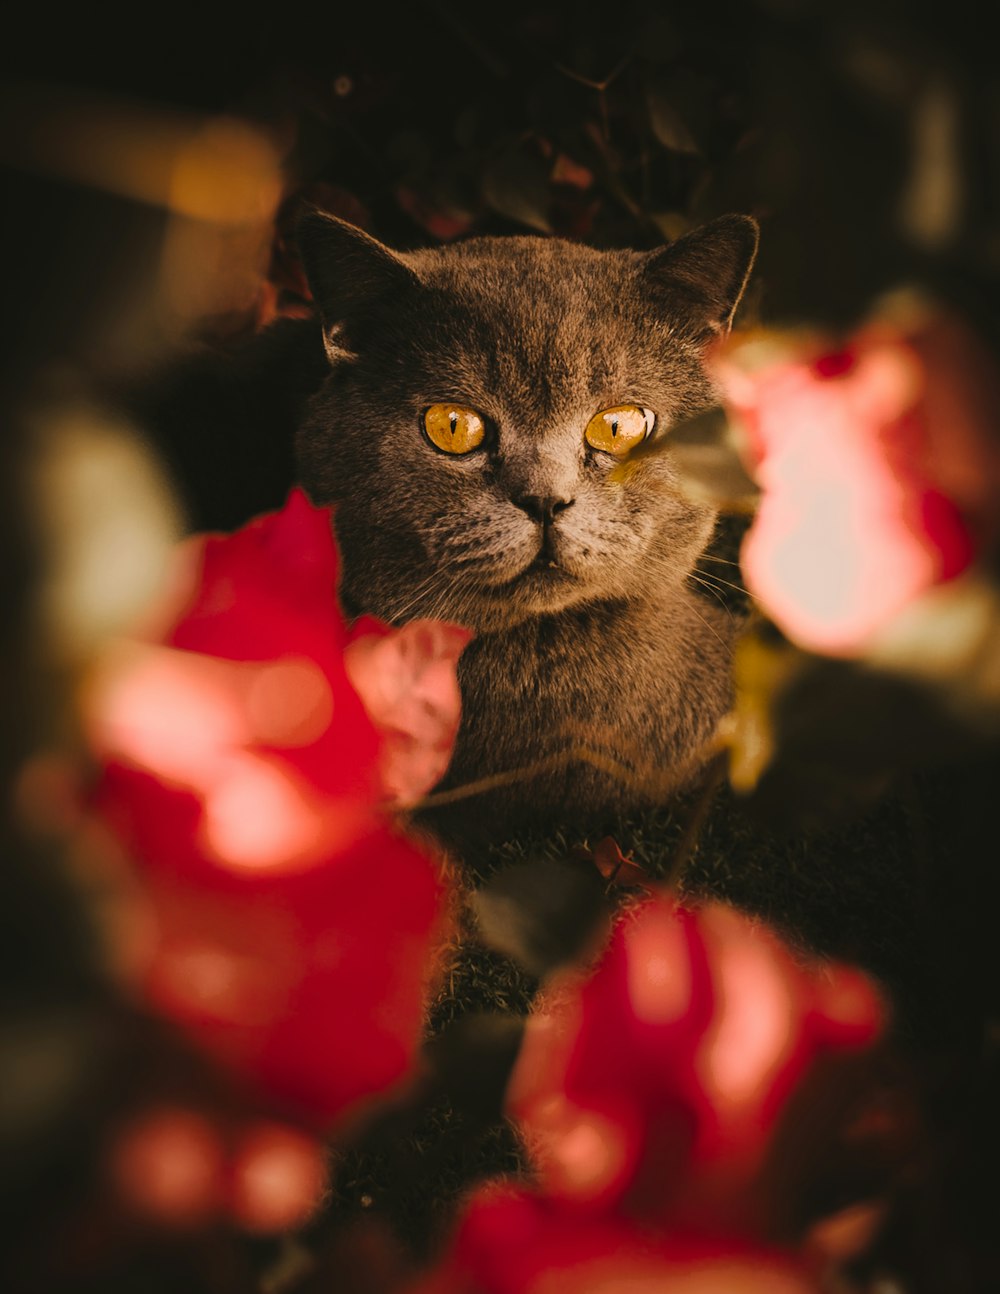 a cat in a flower bed